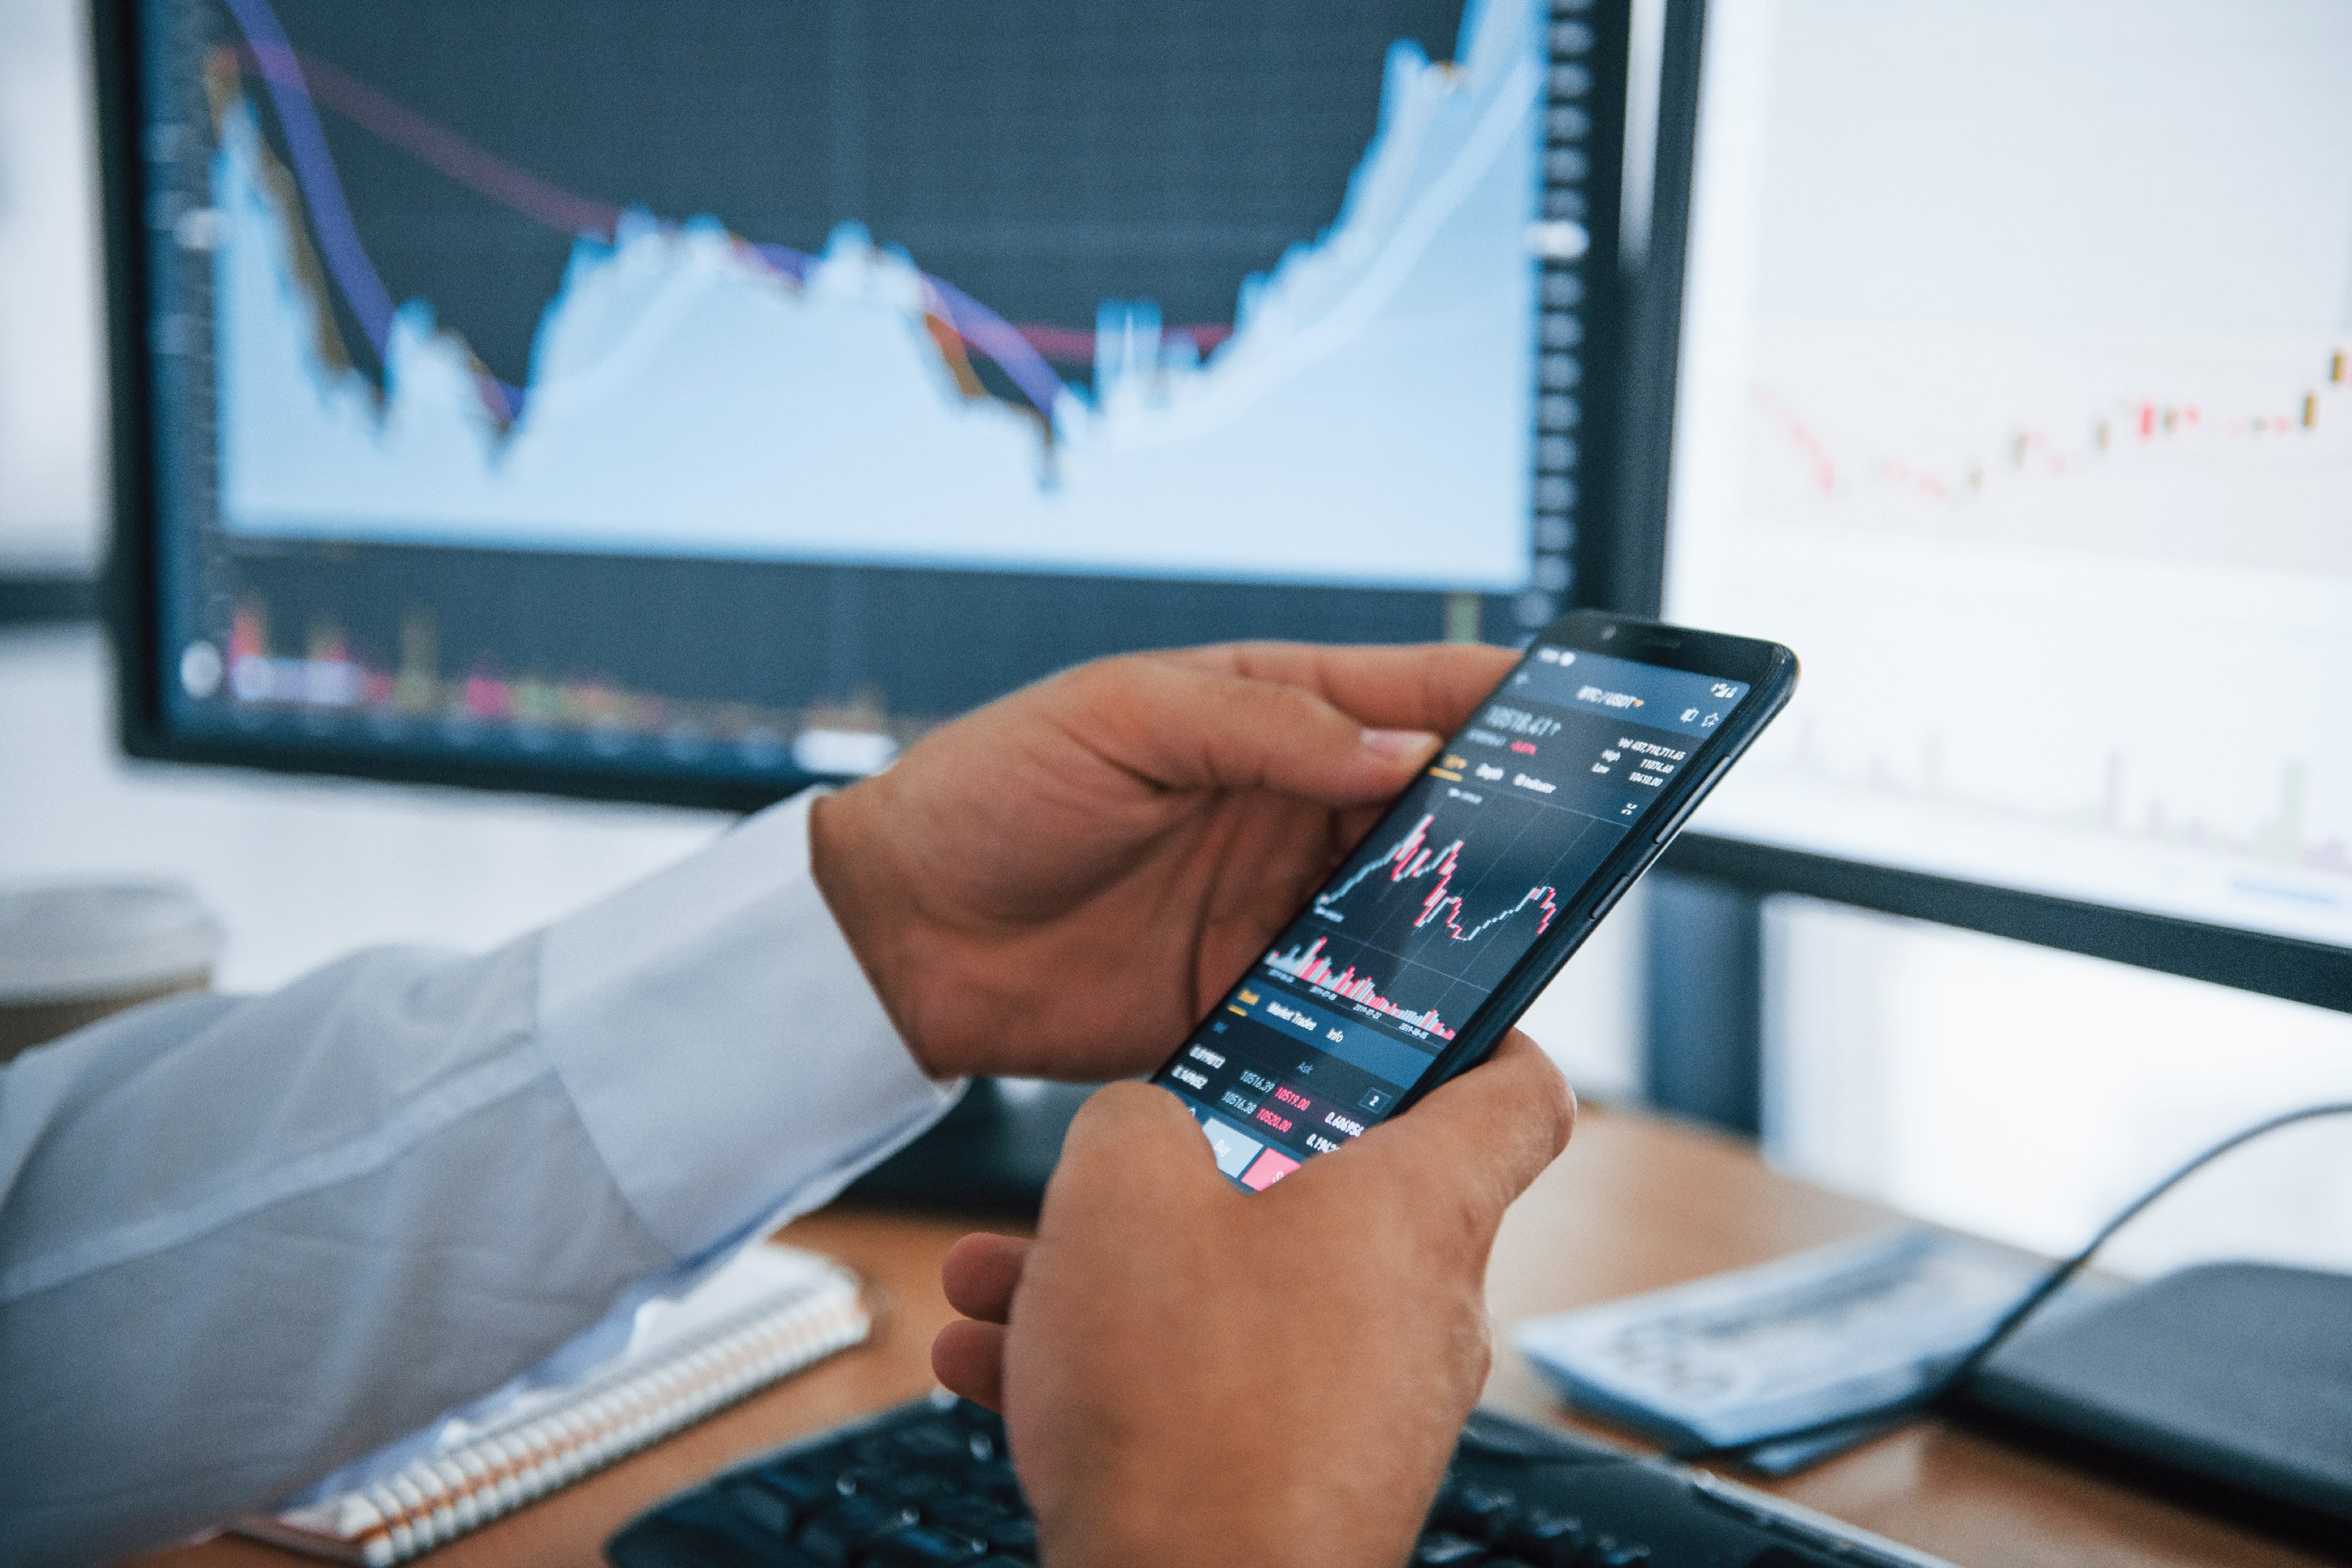 monitoring the stock markets on an investing app